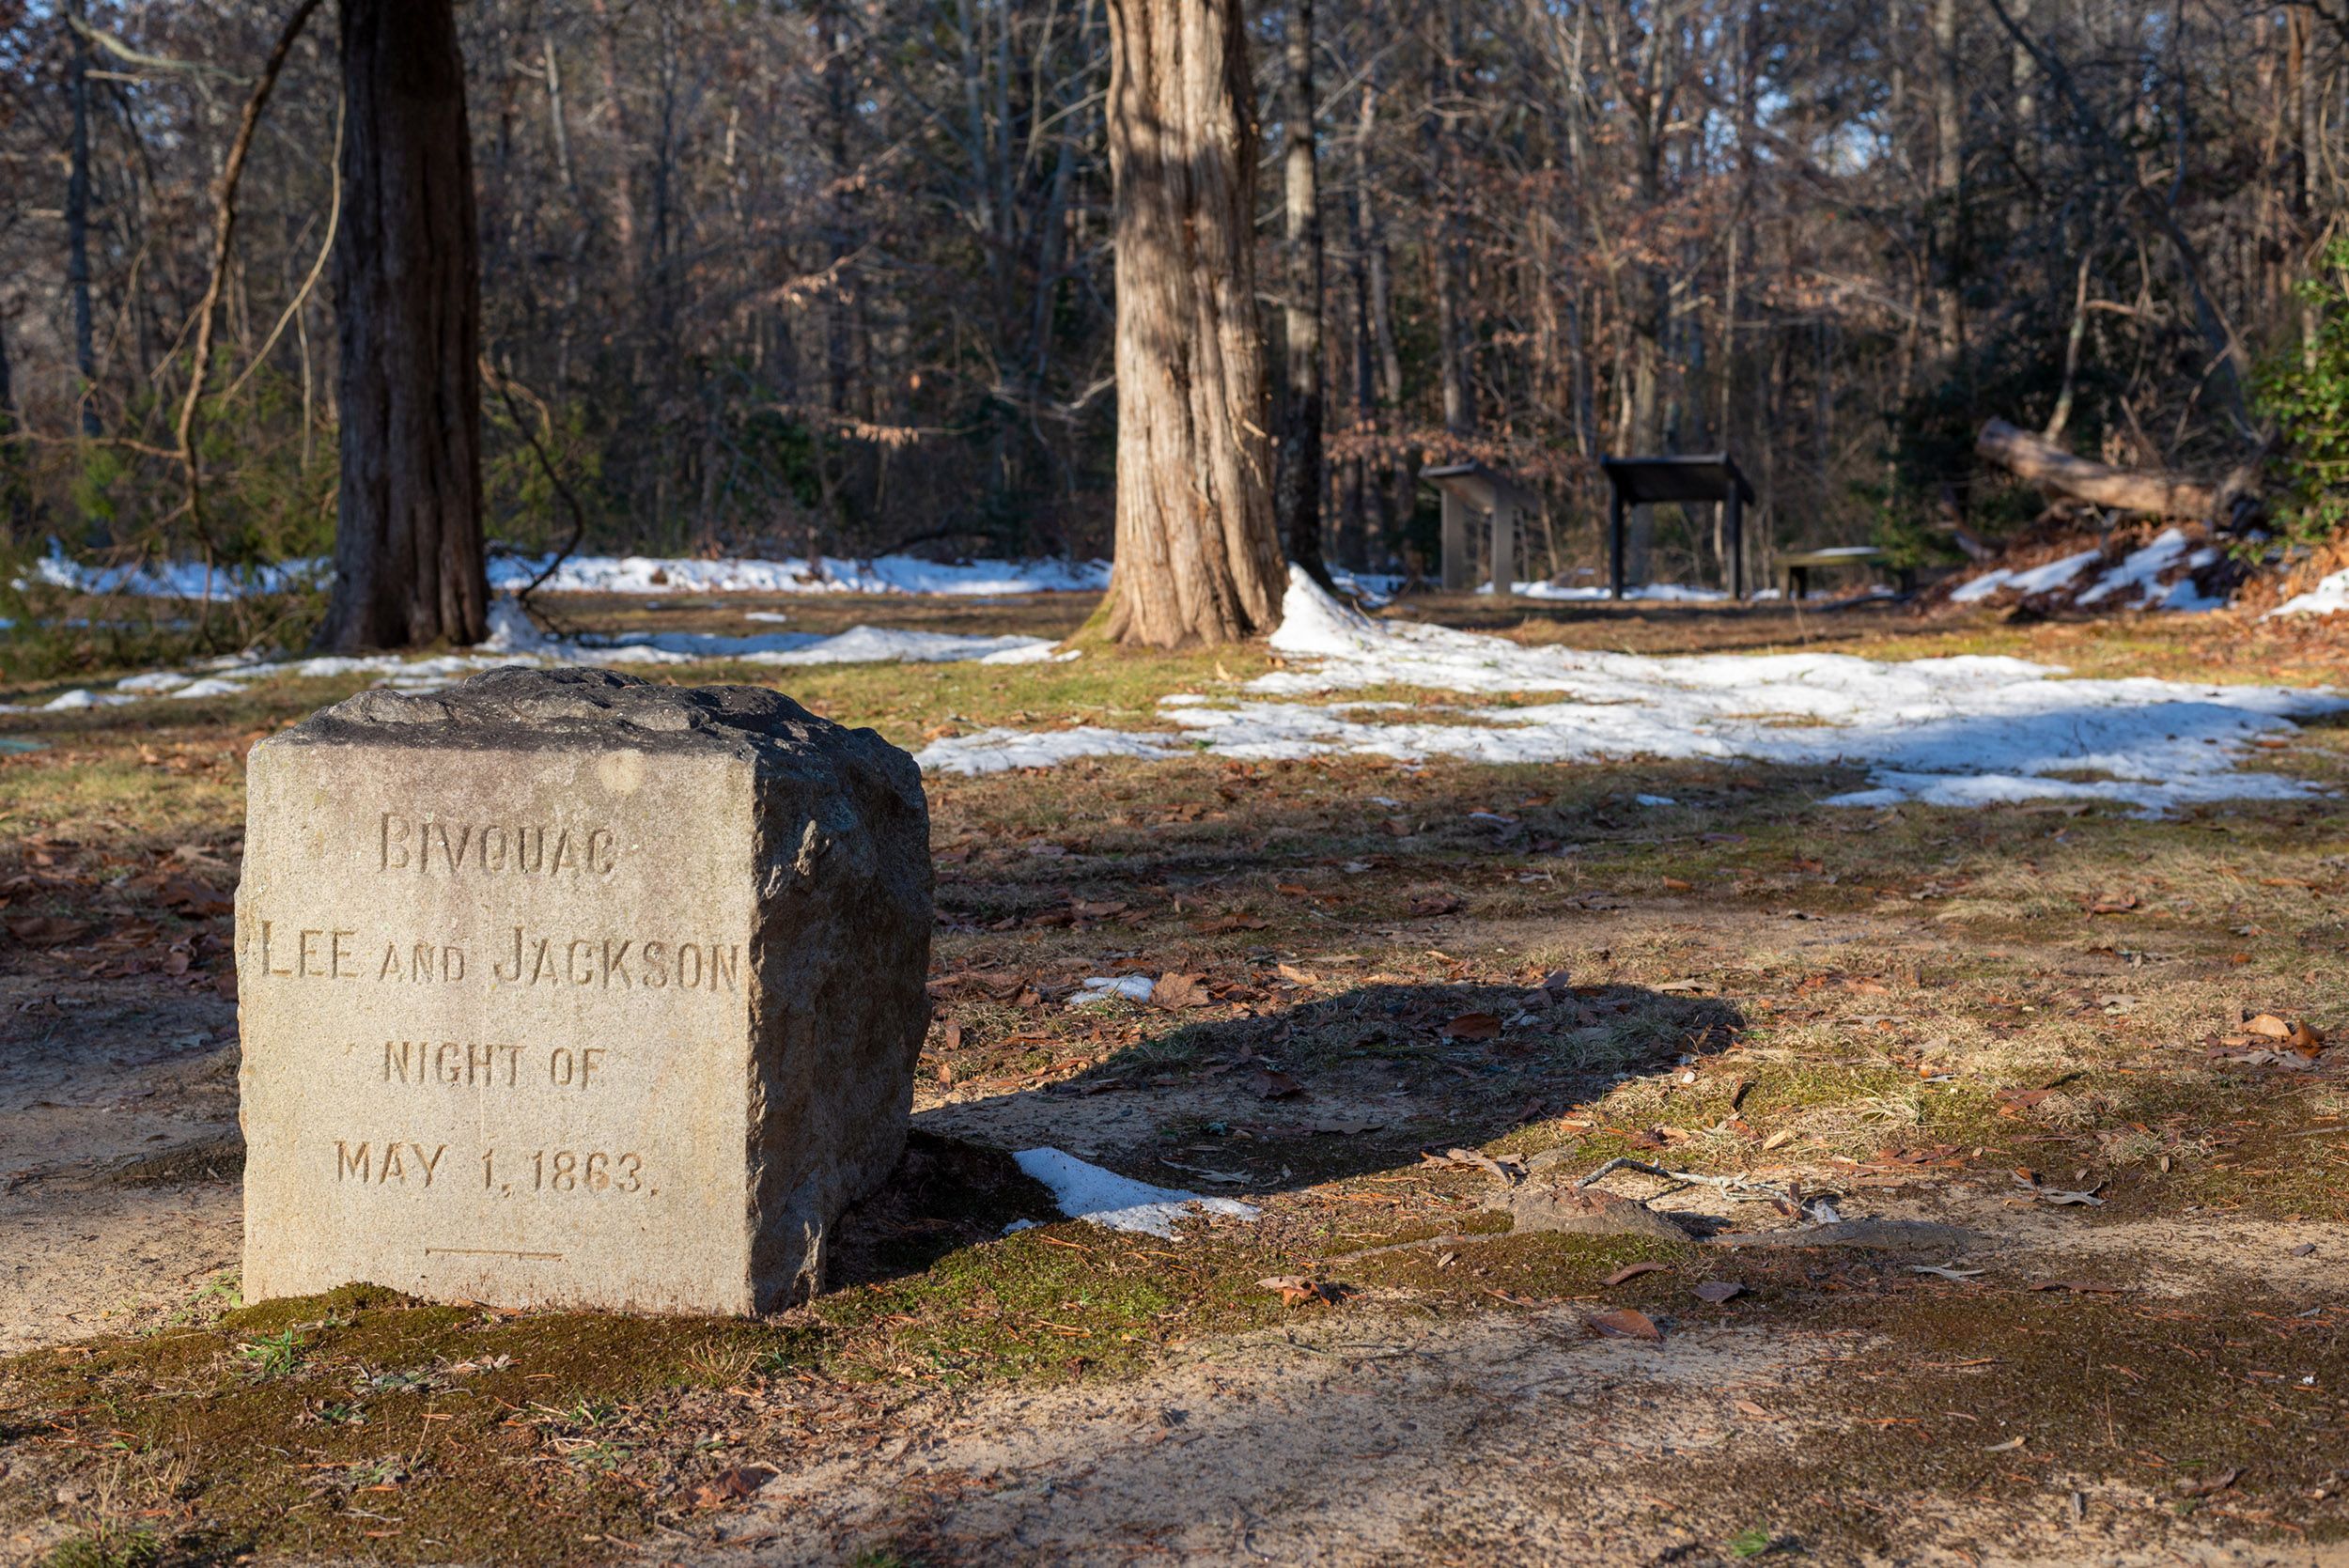 A stone marker in an open space with some snow on the ground.